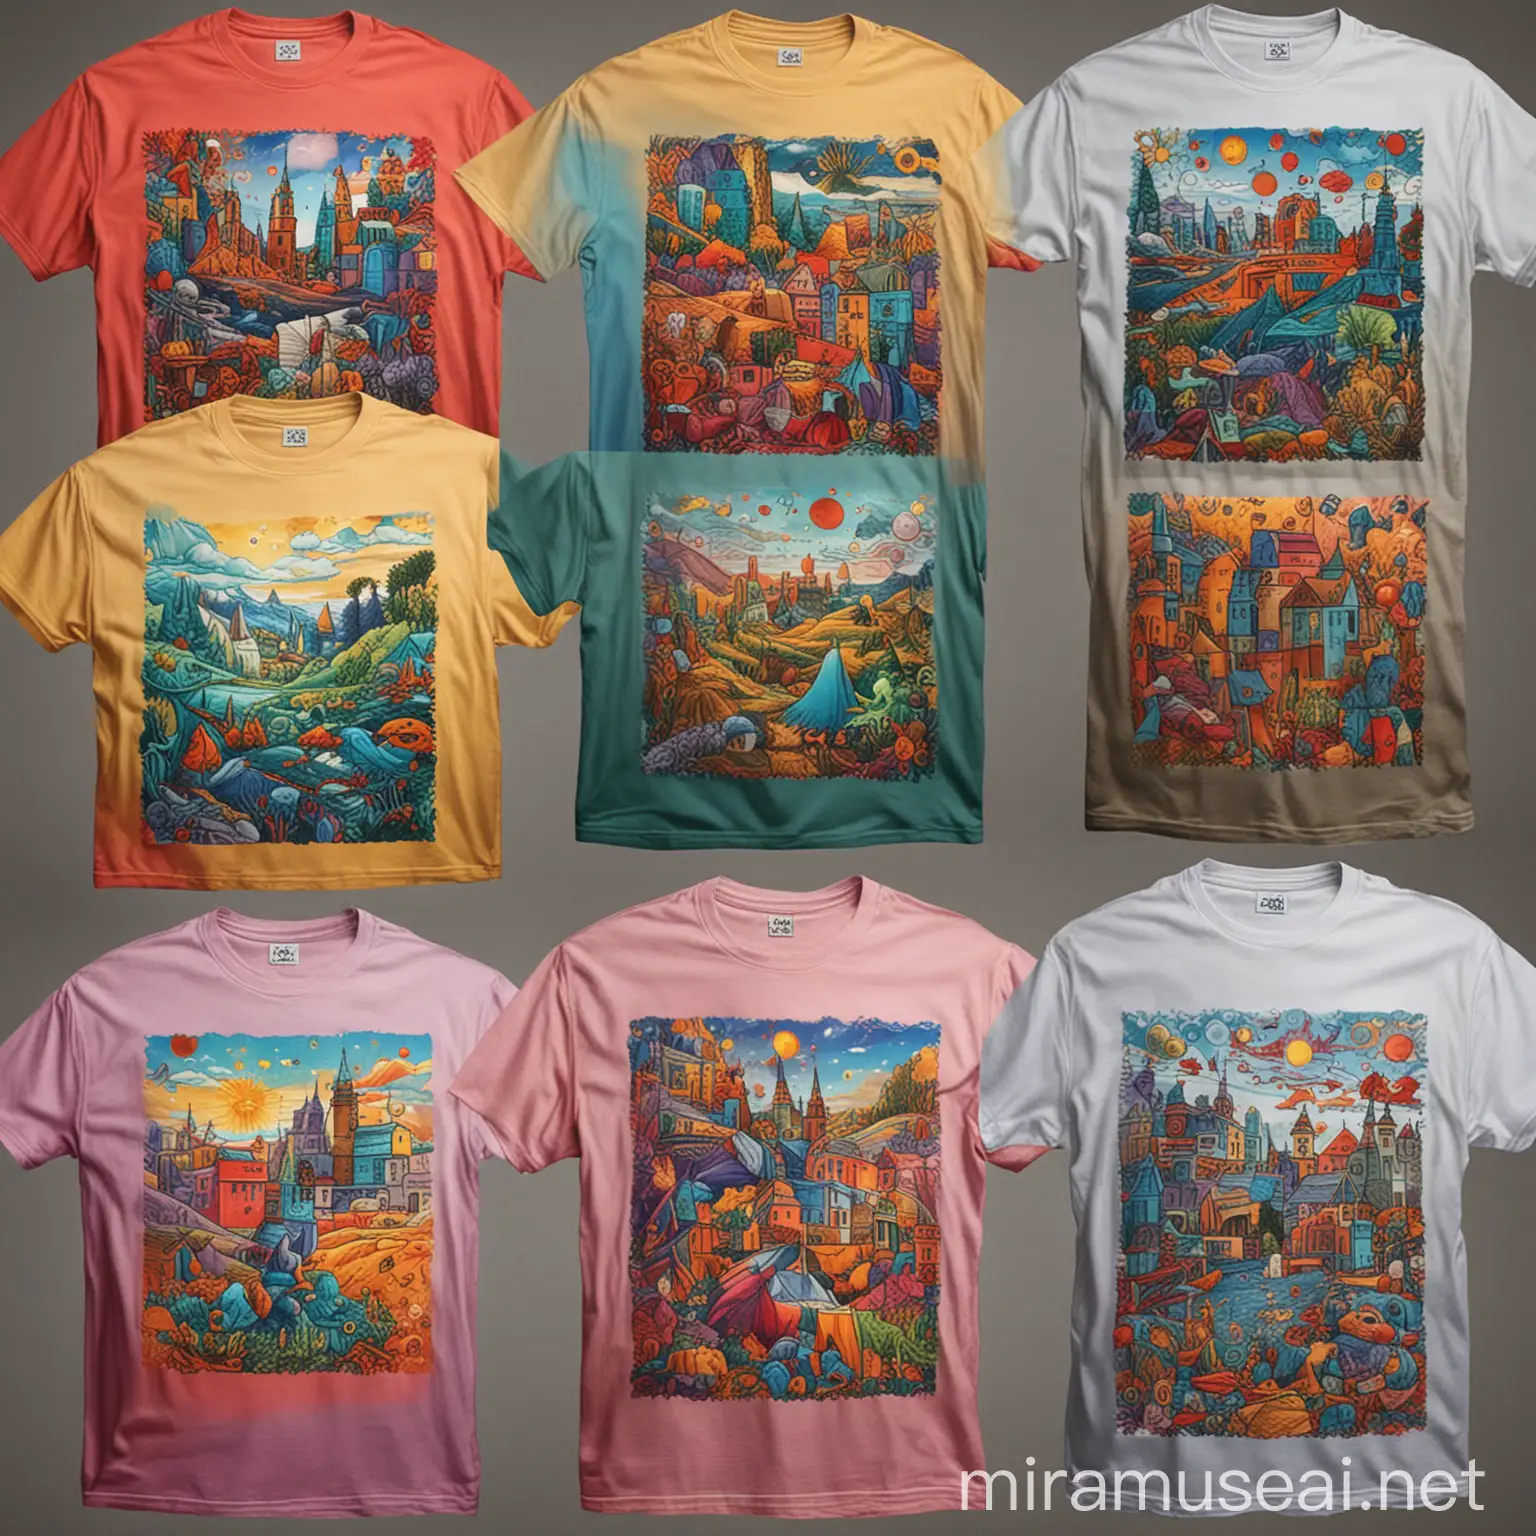 Colourful images for a t shirt